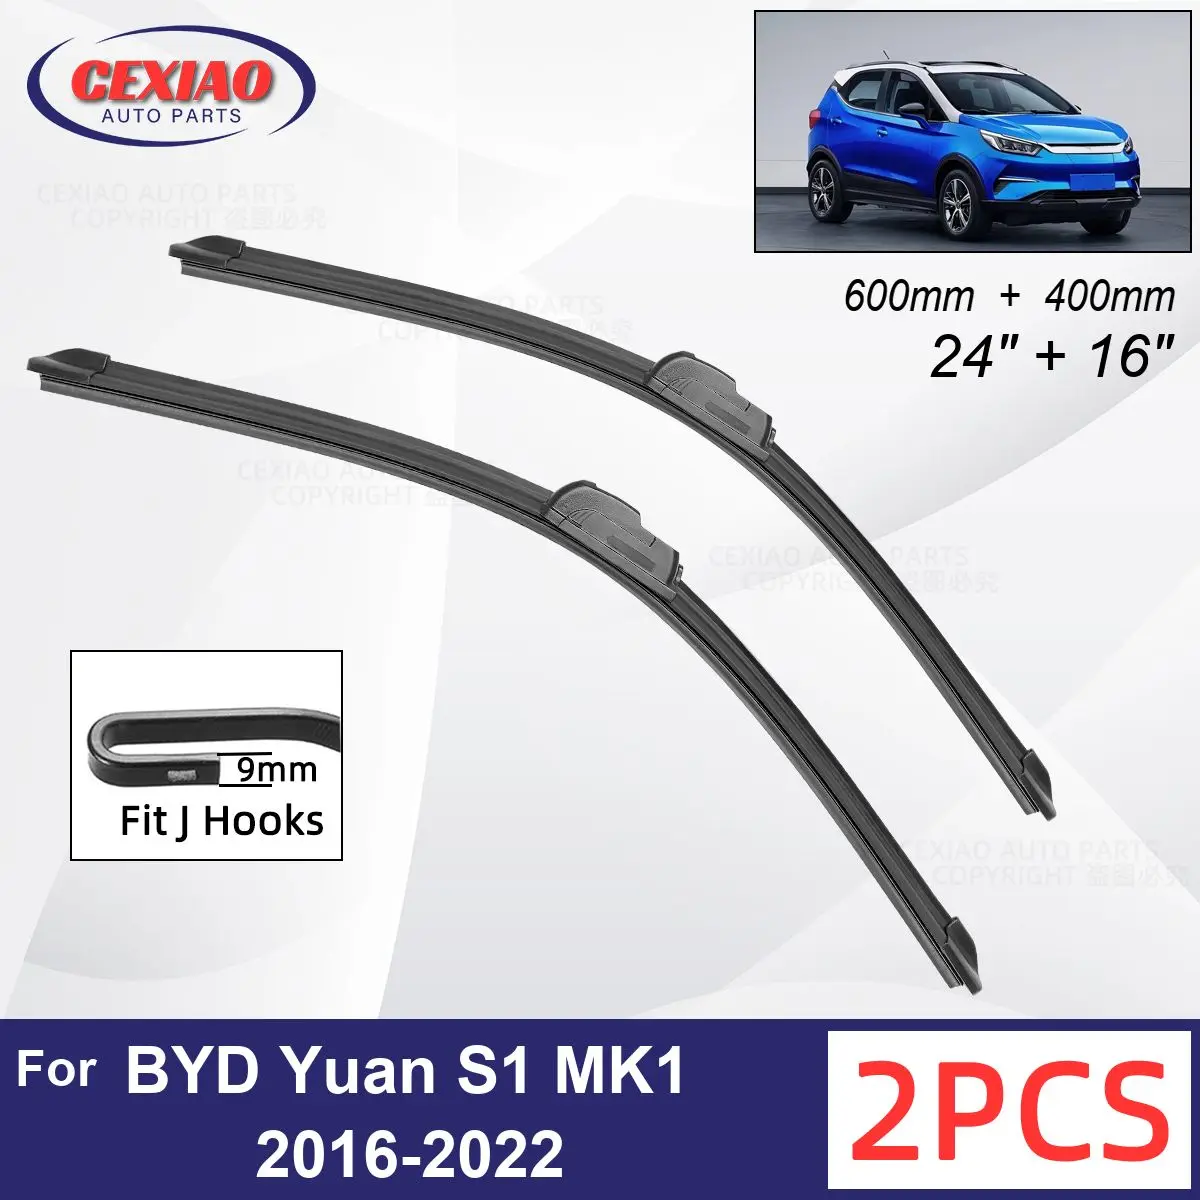 

Car Wiper For BYD Yuan S1 MK1 2016-2022 Front Wiper Blades Soft Rubber Windscreen Wipers Auto Windshield 24"+16" 600mm + 400mm